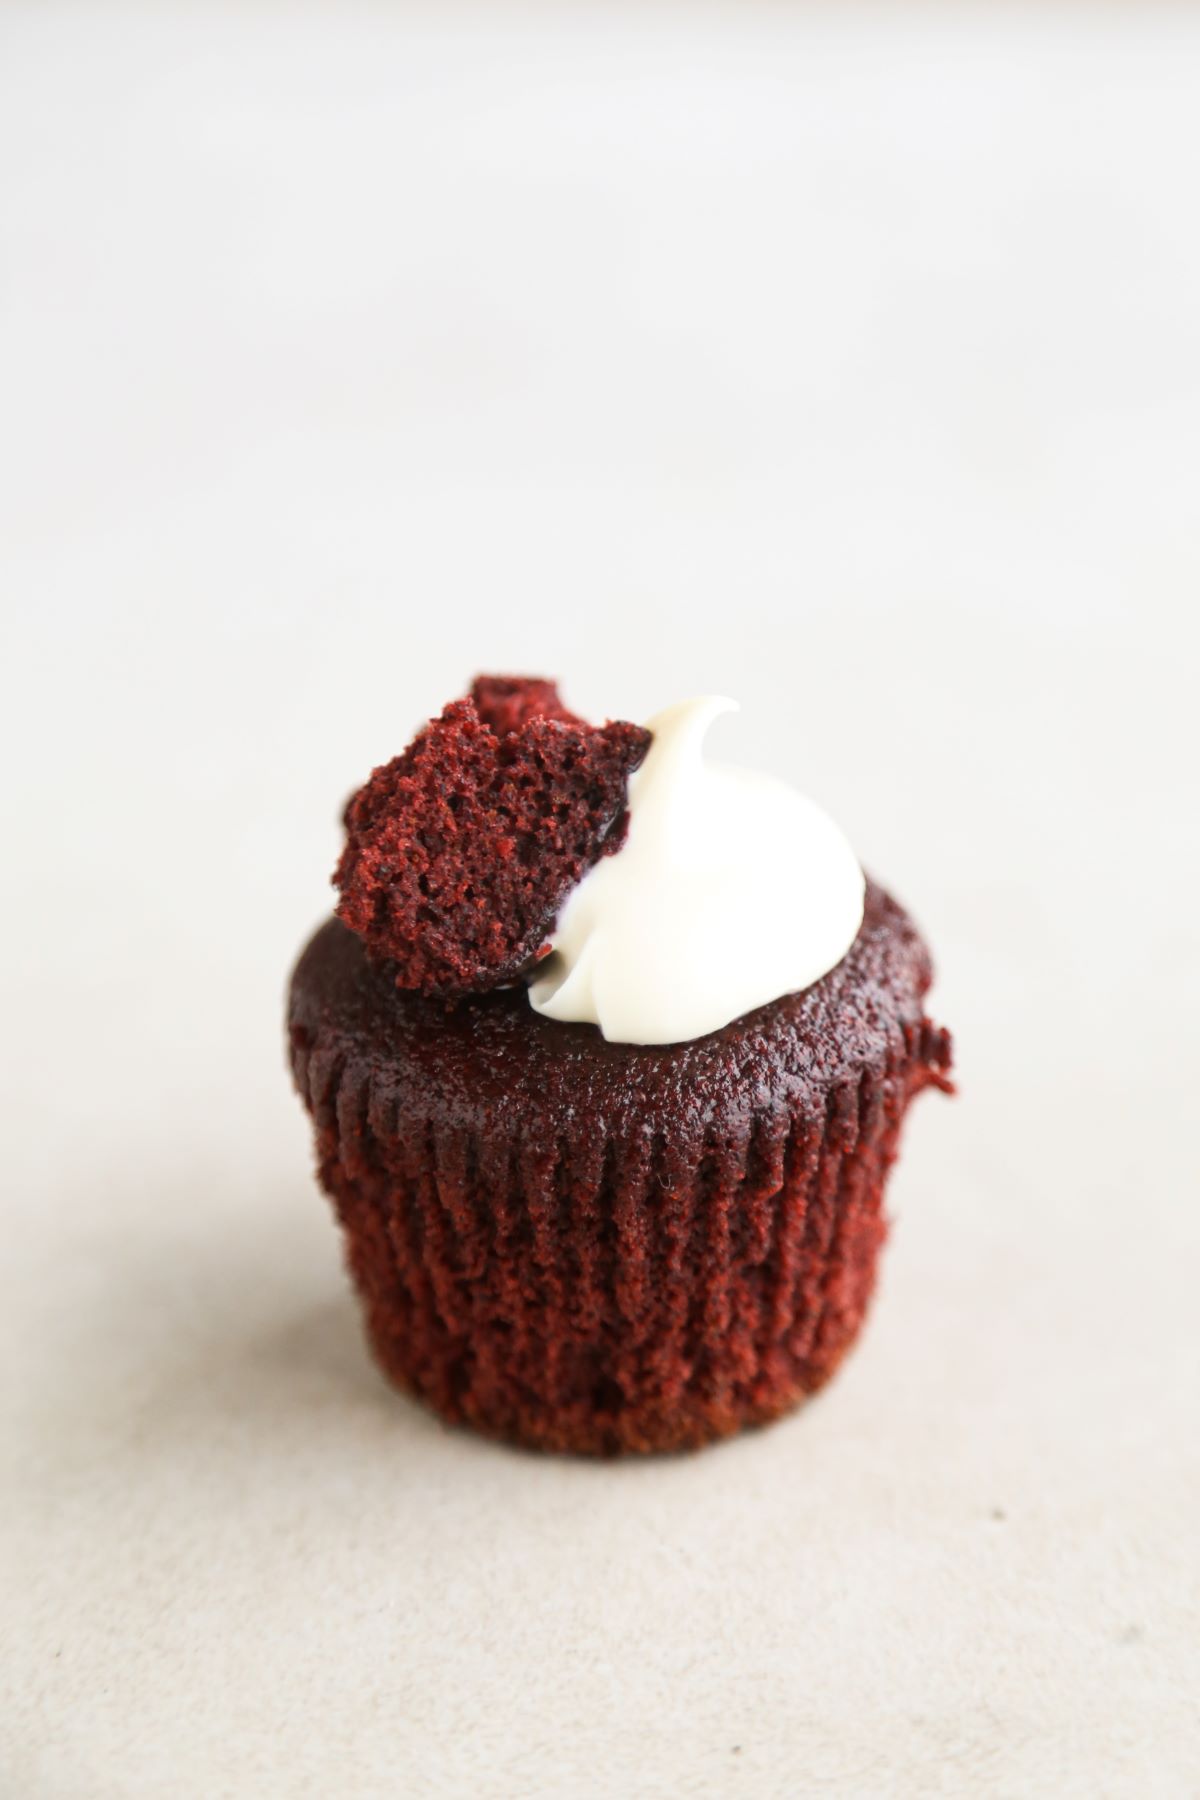 Red velvet muffin with cream cheese frosting on a white surface.